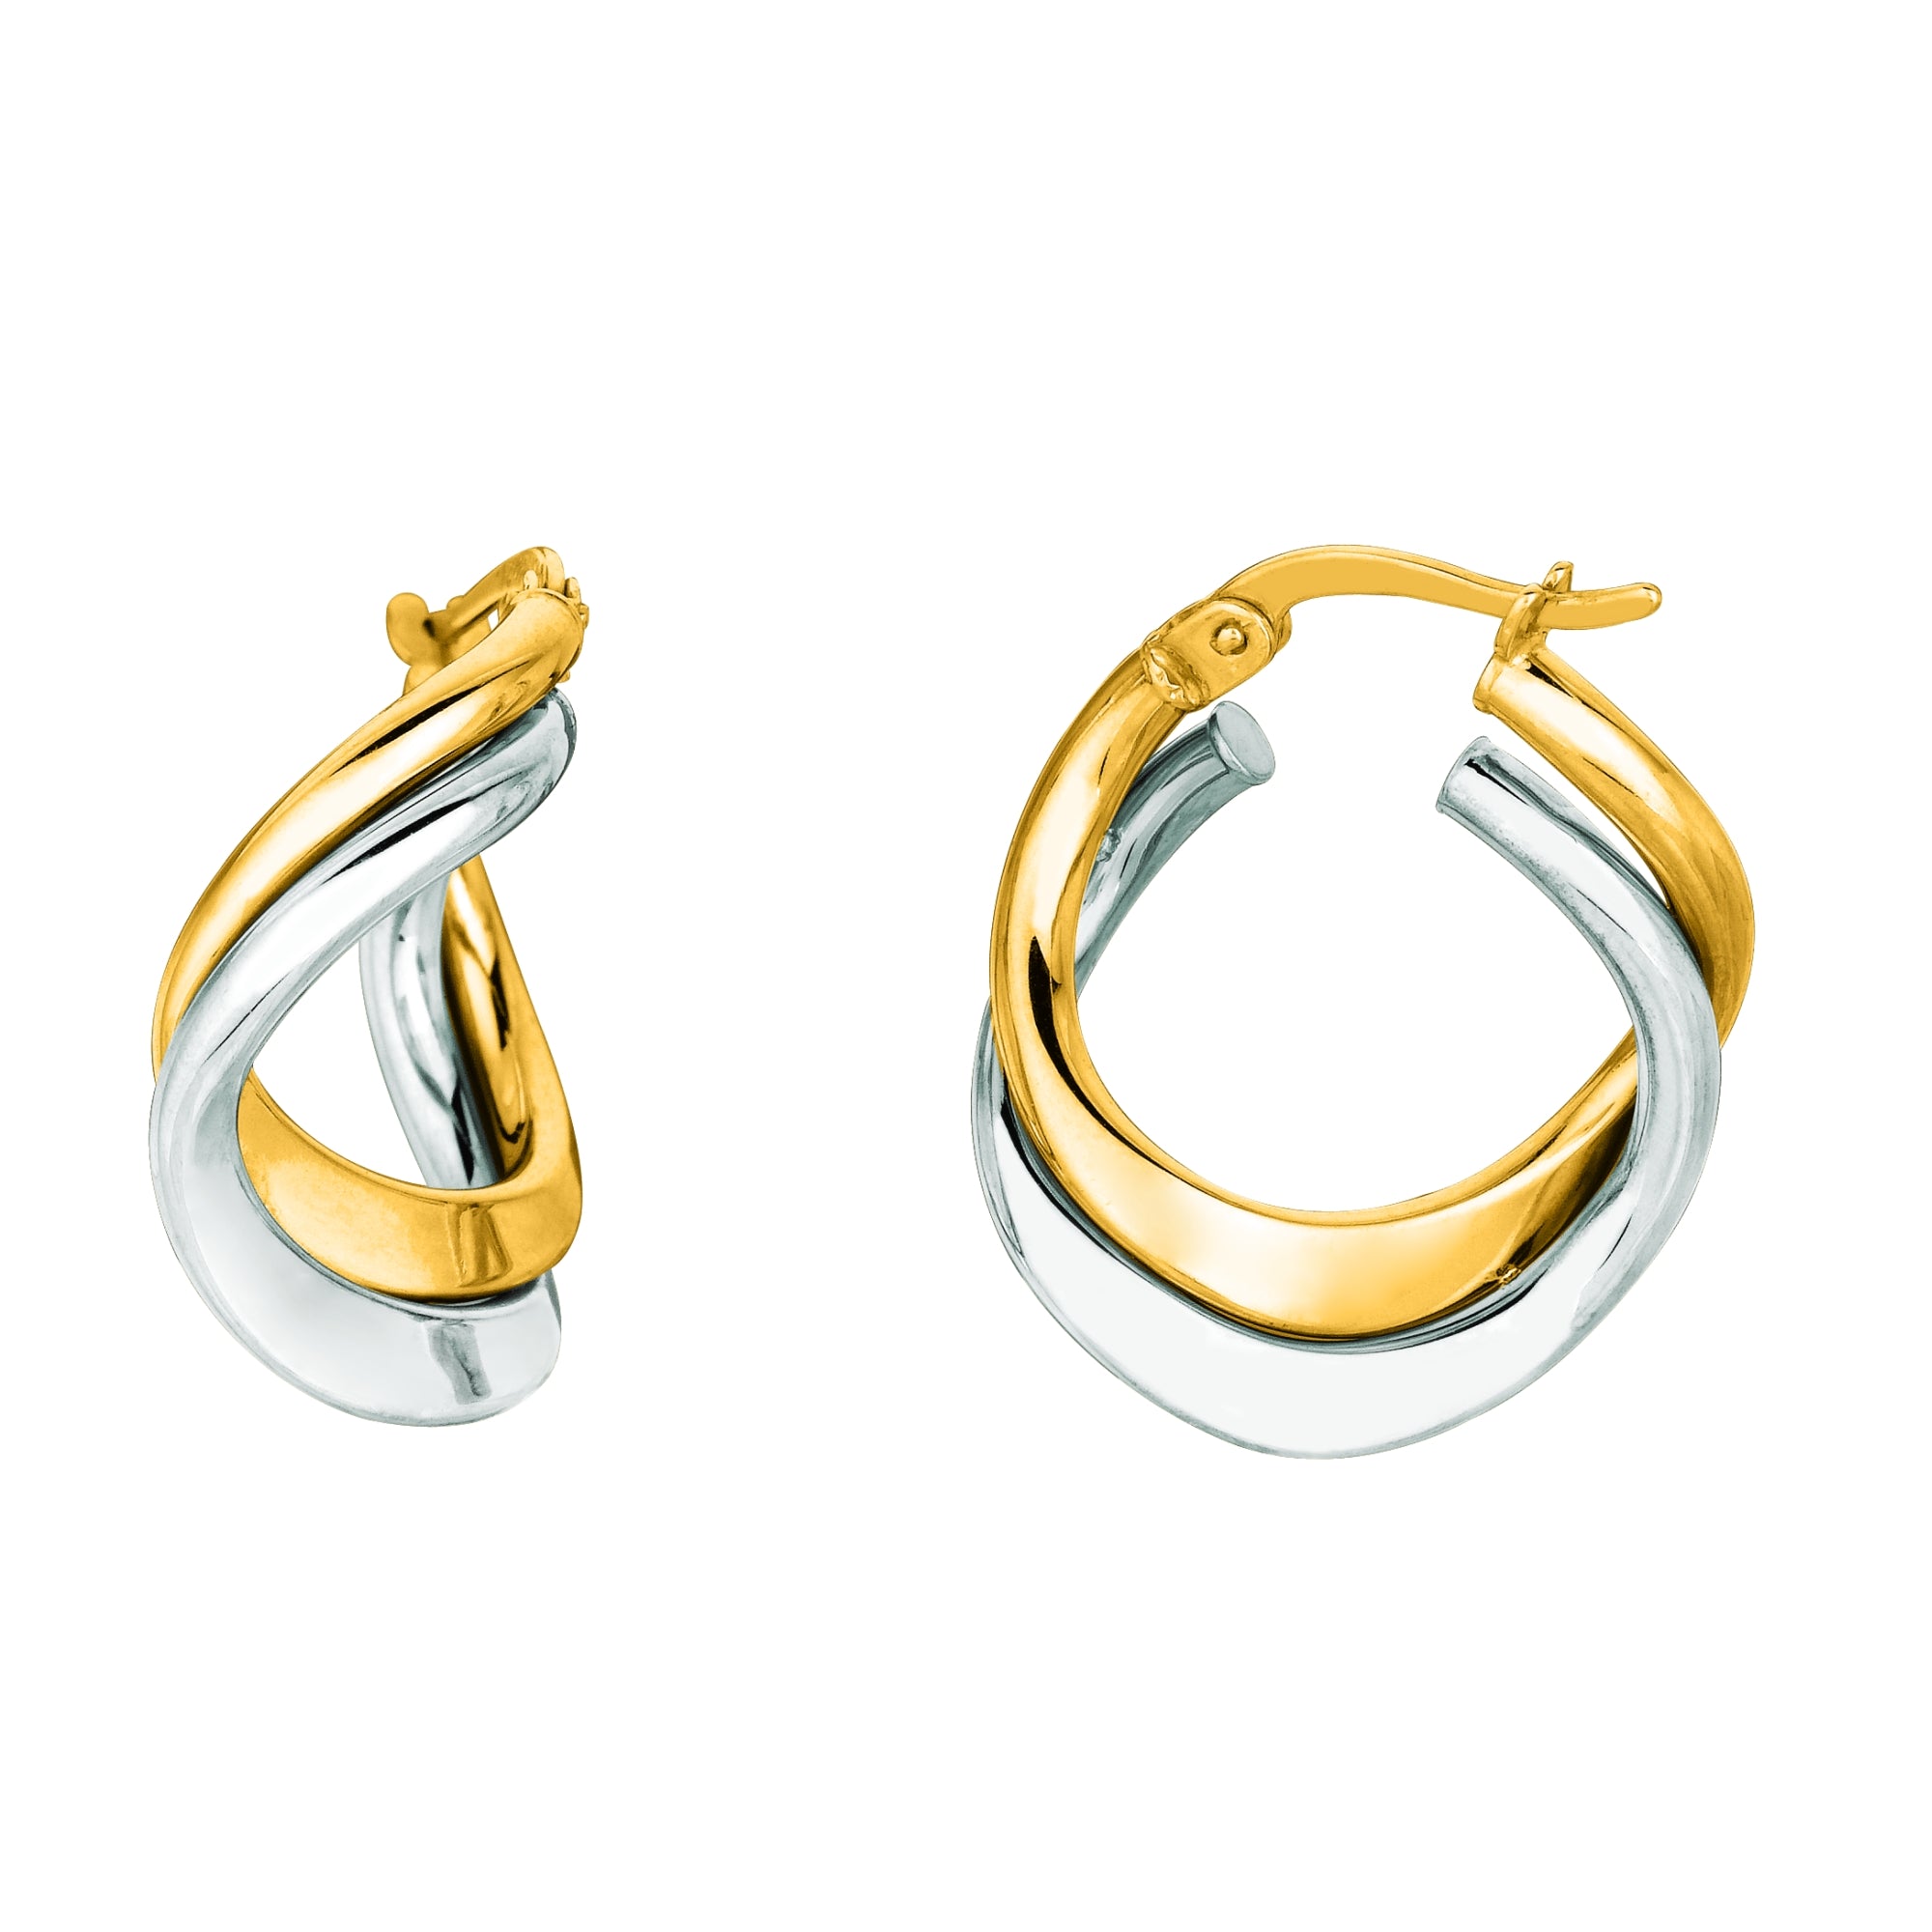 14K Yellow And White Gold Double Row Hoop Earrings, Diameter 17mm fine designer jewelry for men and women